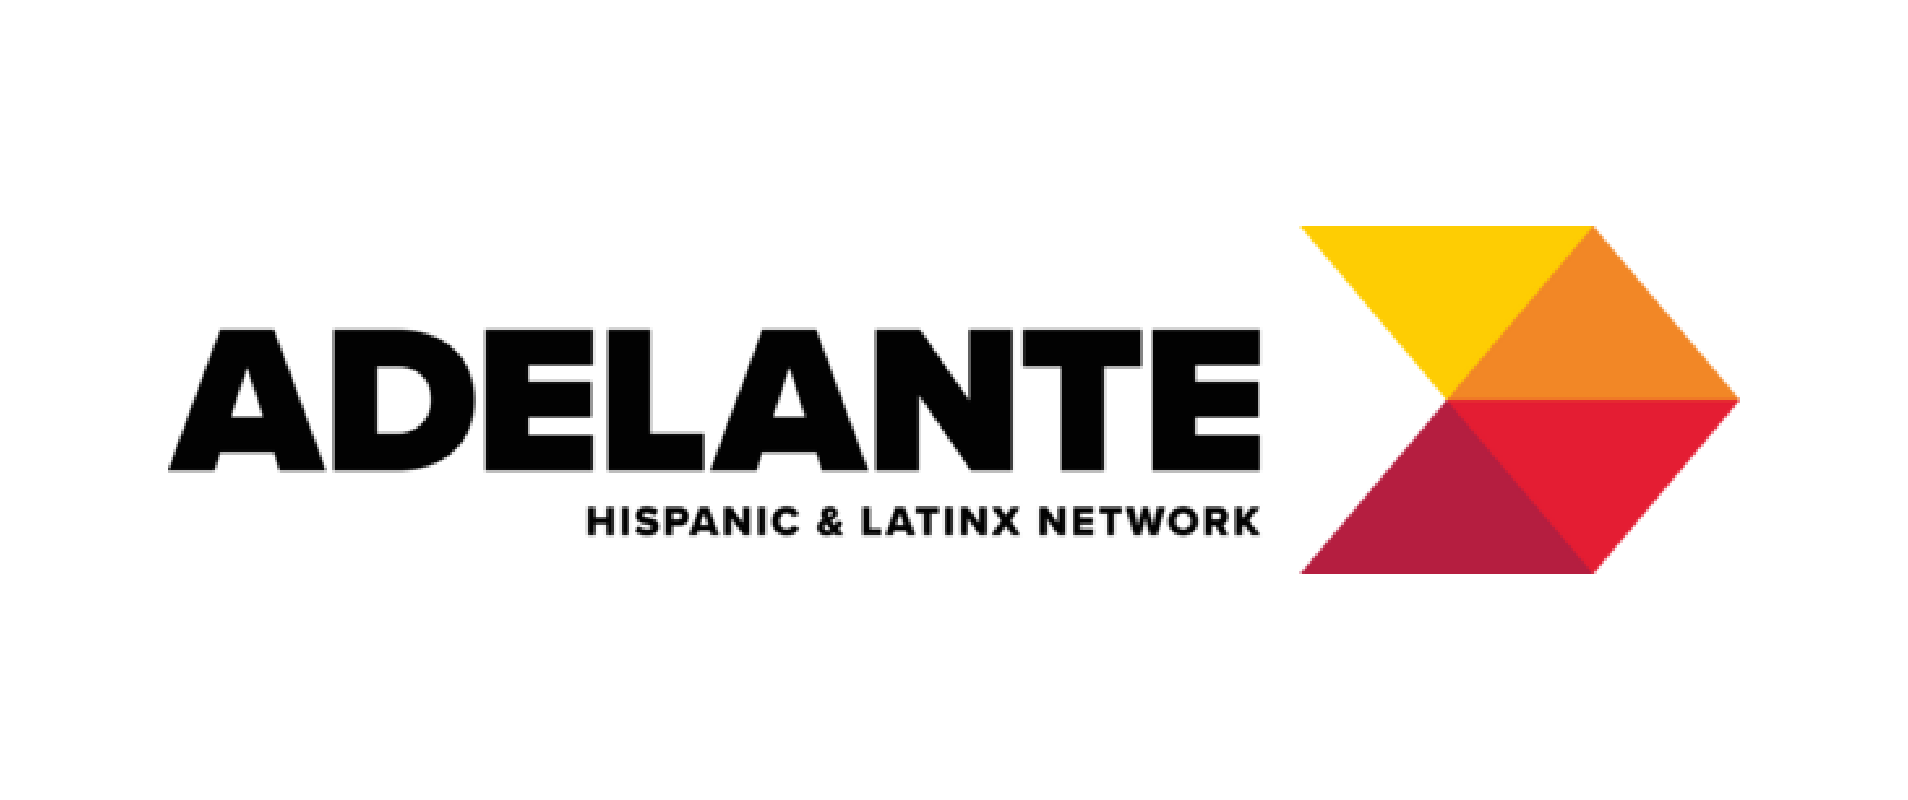 Adelante con DISH employee resource group company supporting Hispanic/Latinx workers